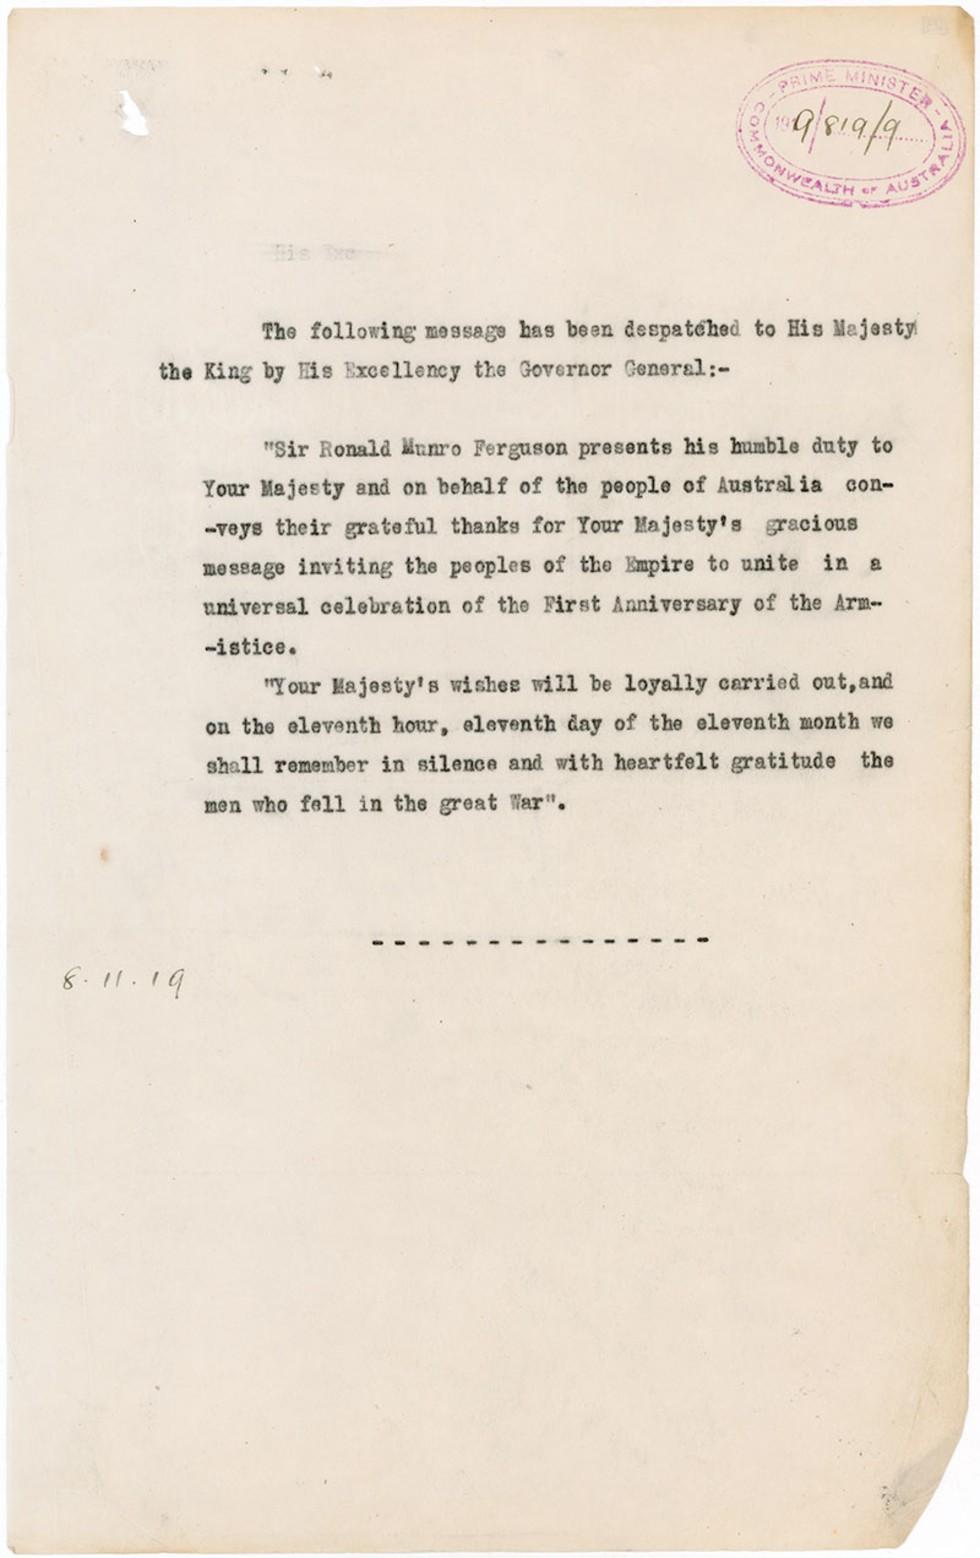 The Australian Governor-General responds to the King's message regarding Armistice Day.